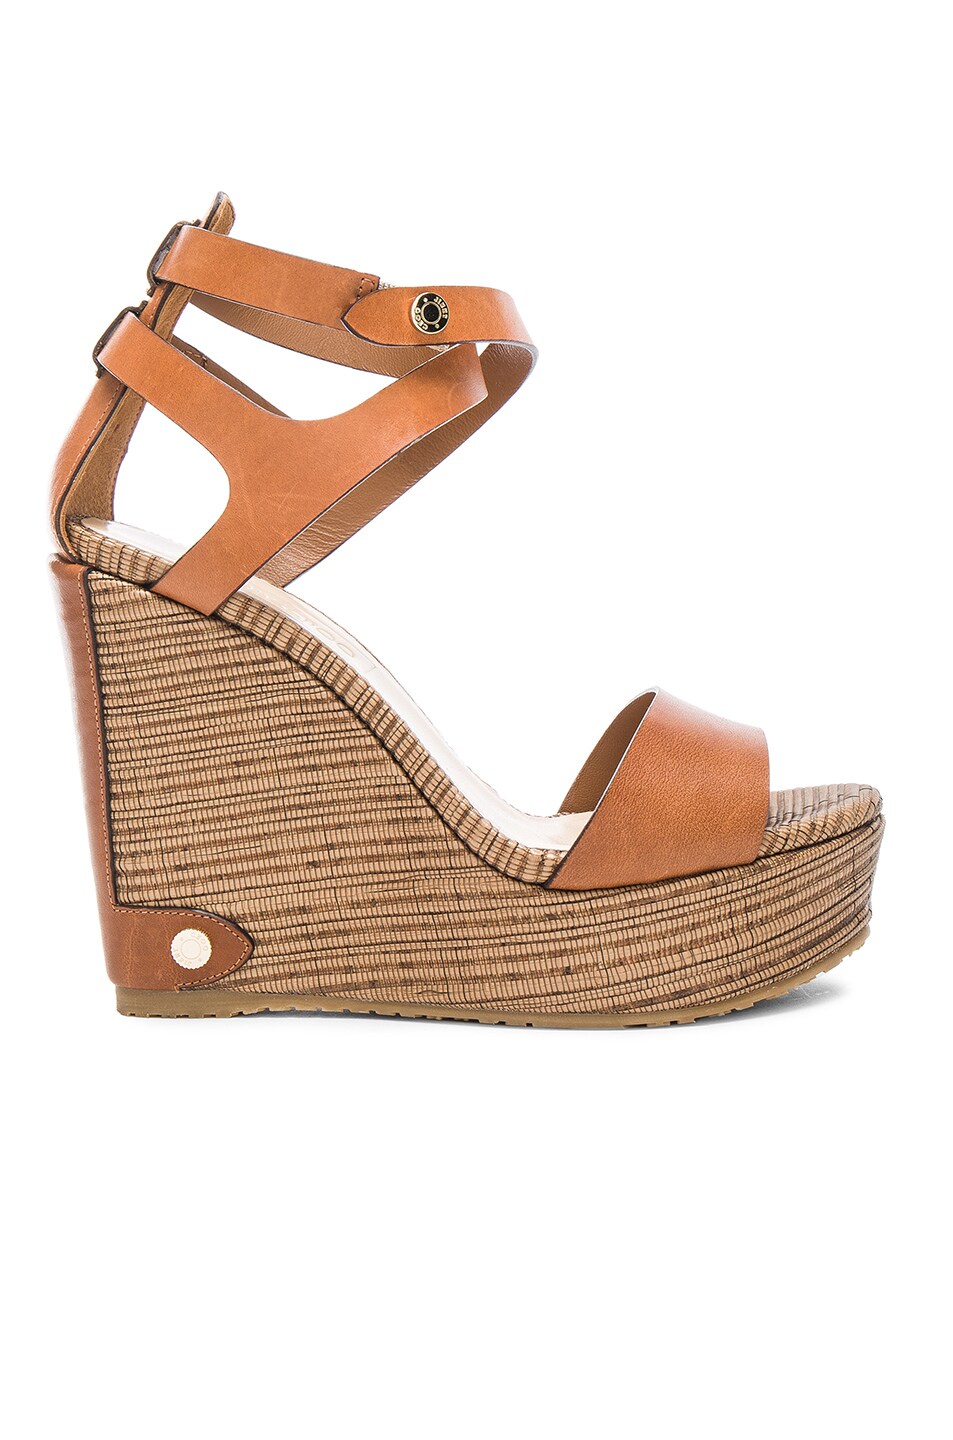 Image 1 of Jimmy Choo Leather Noelle Wedges in Canyon